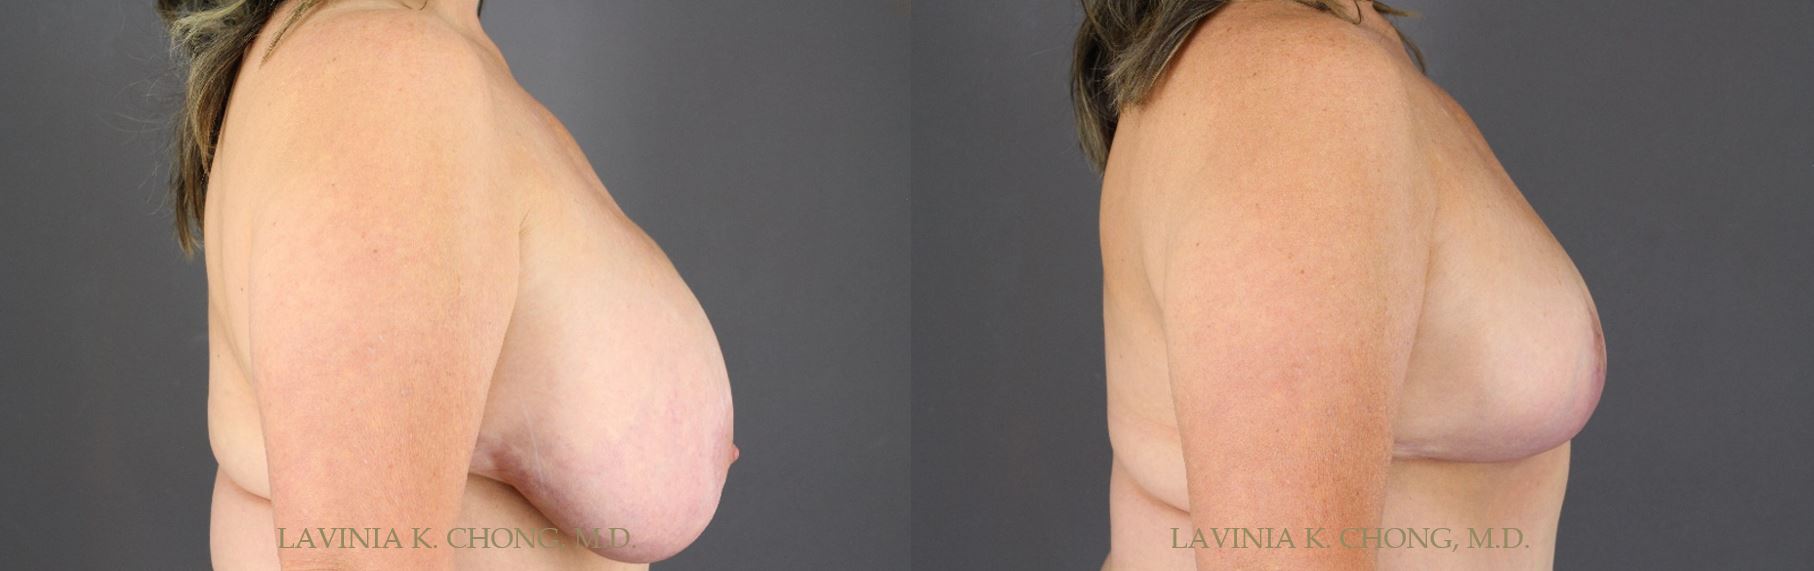 Before and After photo of 56 yr old desiring smaller lifted breast. Patient history of McGhan Saline Breast Implants and Grade III Mammary Ptosis. Surgical plan includes Implant Explantation-Mastopexy with Application of DuraSorb and Liposuction of the Dorsal rolls by female plastic surgeon in Newport Beach, California.